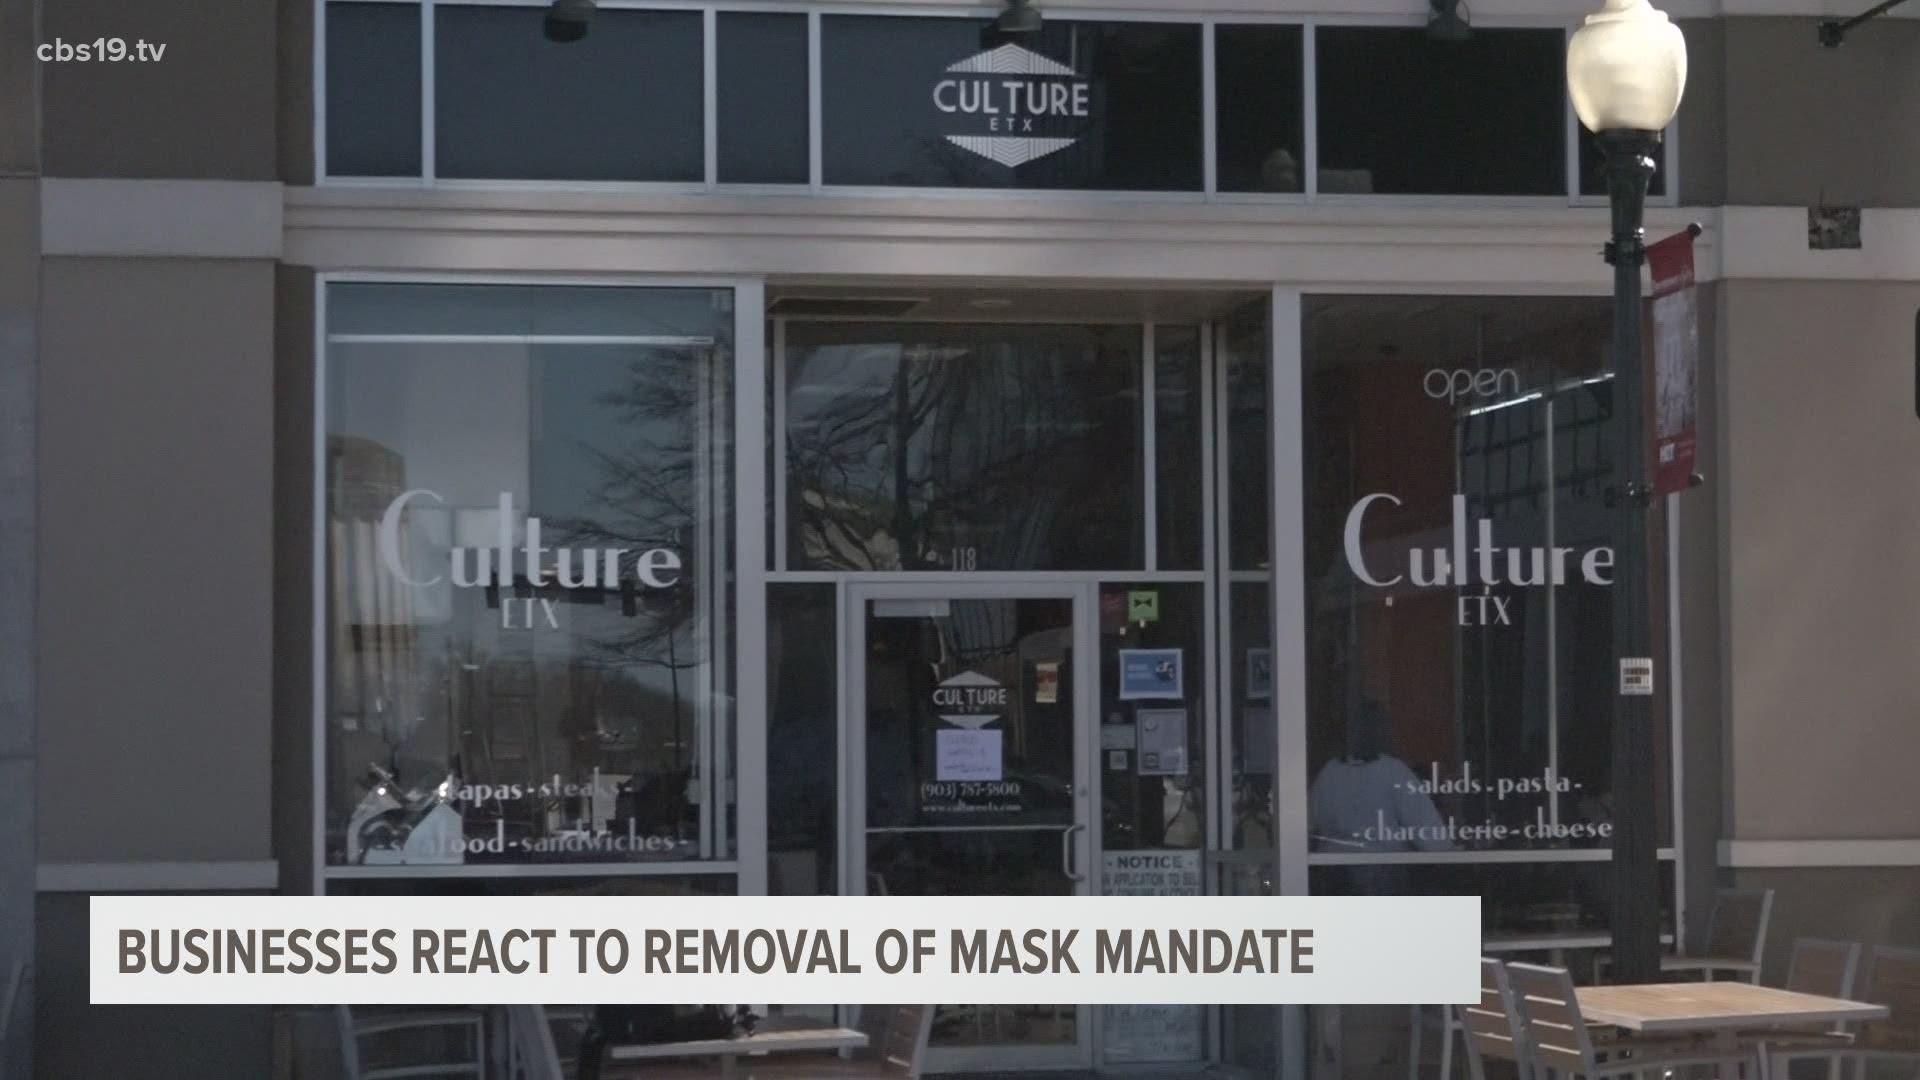 Come March 10, Governor Greg Abbott's mask mandate will no longer be in effect and everyone is reacting to that news differently including Culture ETX in Tyler.